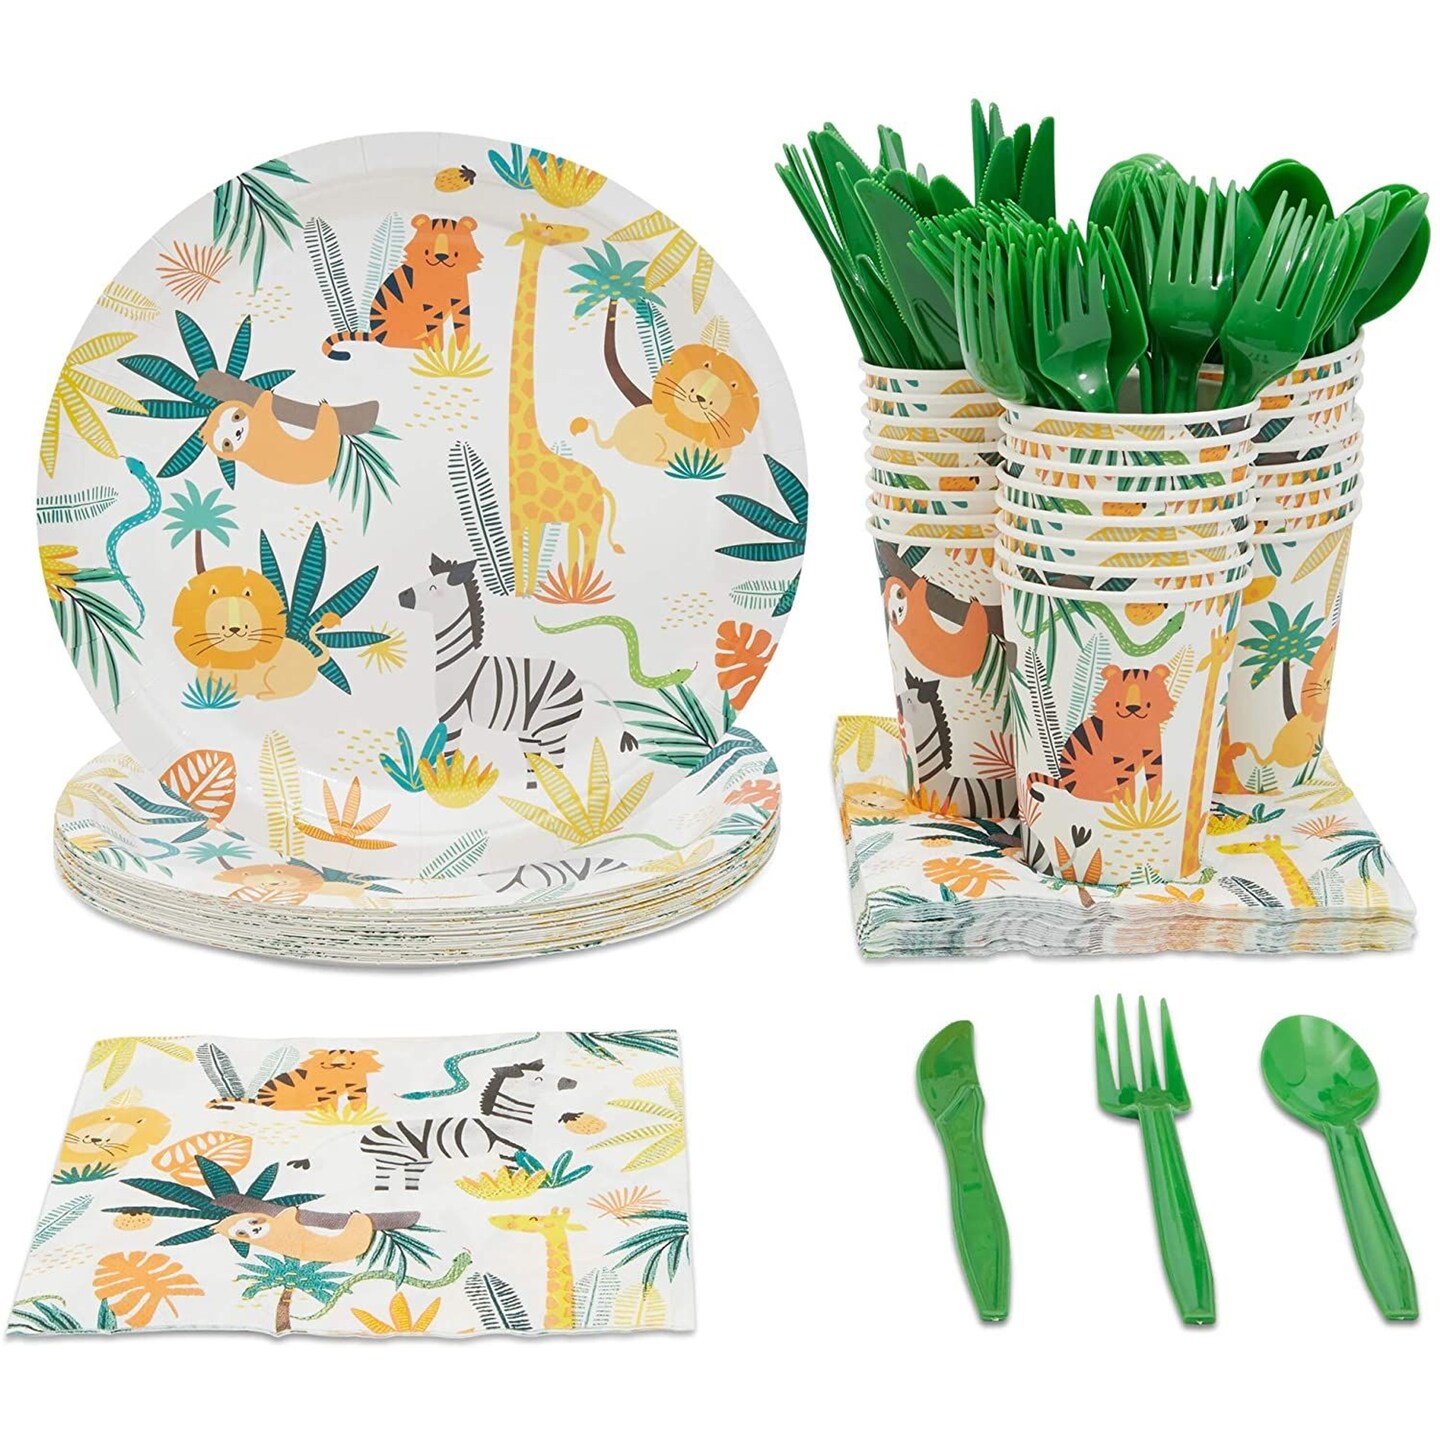 Wholesale Zoo Animal Paper Plates Manufacturer and Supplier